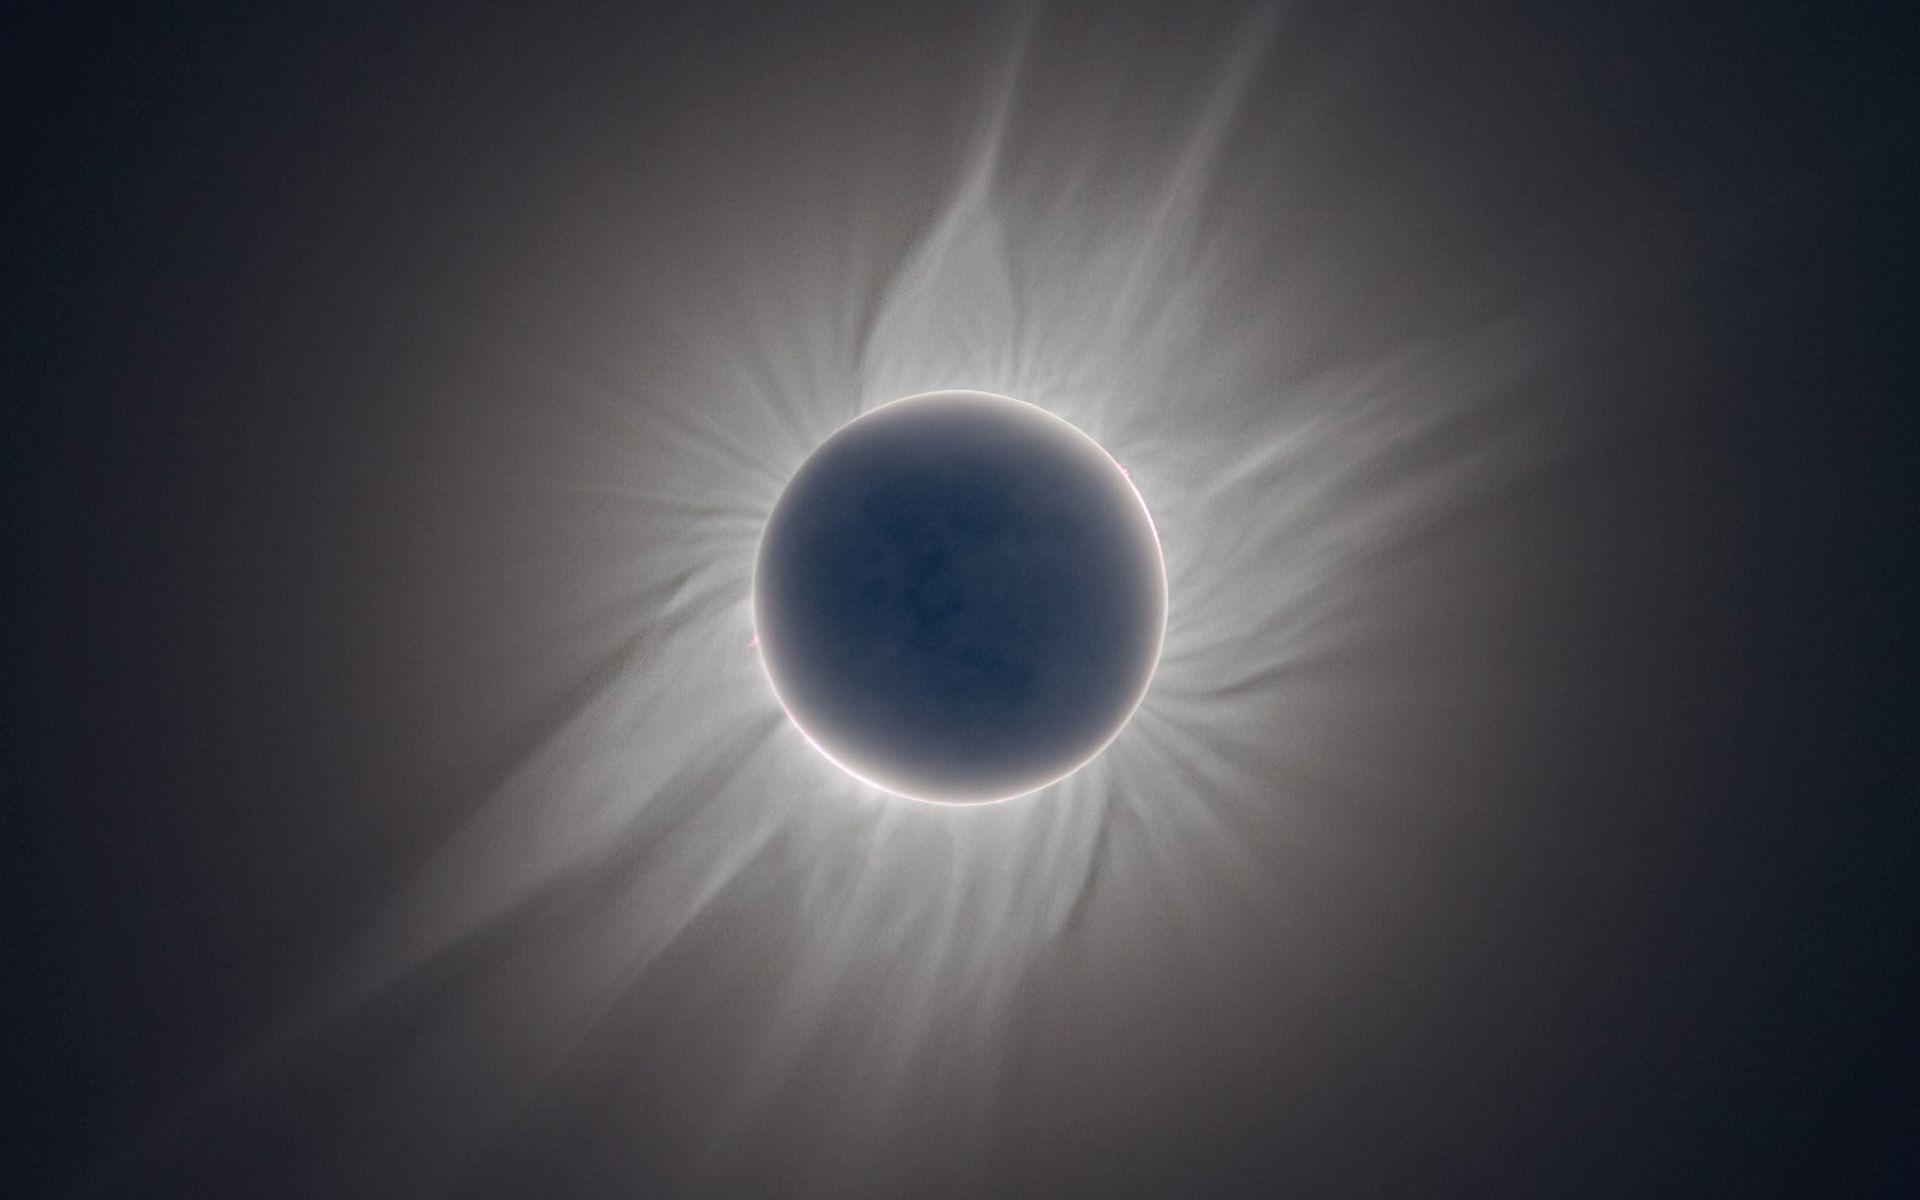 Solar Eclipse wallpapers